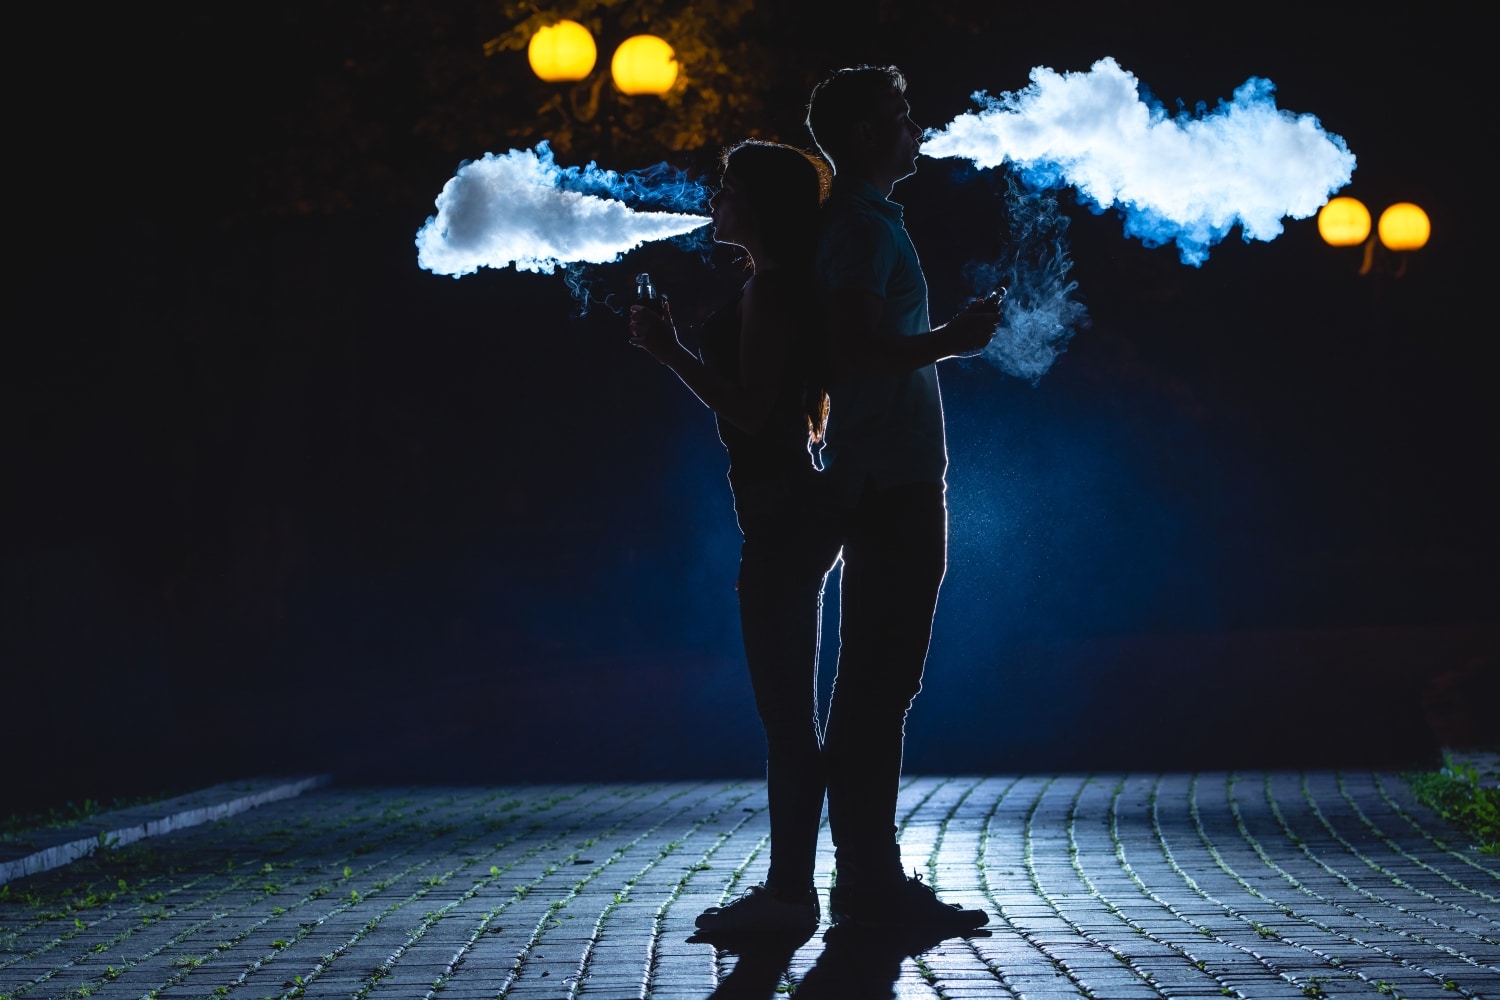 The couple smoke an electric cigarette on the dark alley. night time